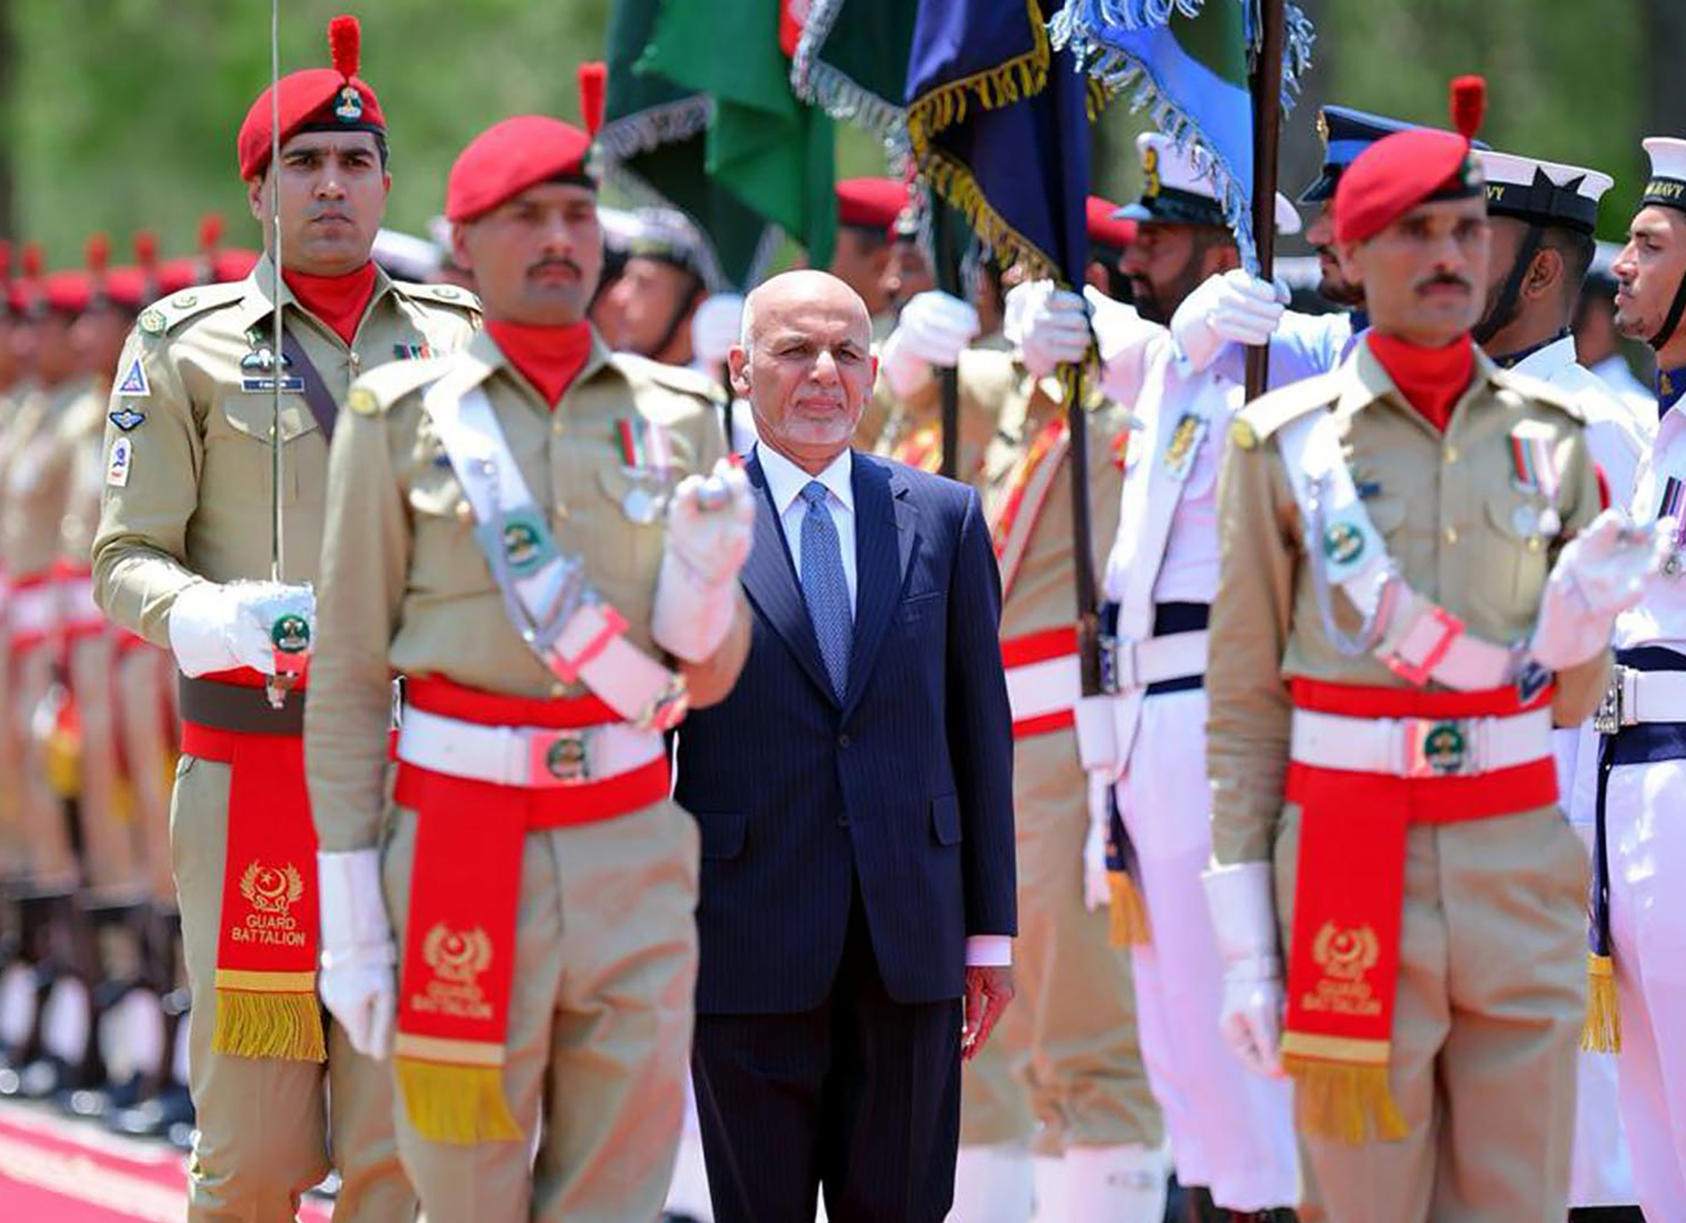 Afghan President Ashraf Ghani arrives in Islamabad on June 27, 2019, for a meeting with Pakistani Prime Minister Imran Khan. (Press Information Department via AP)